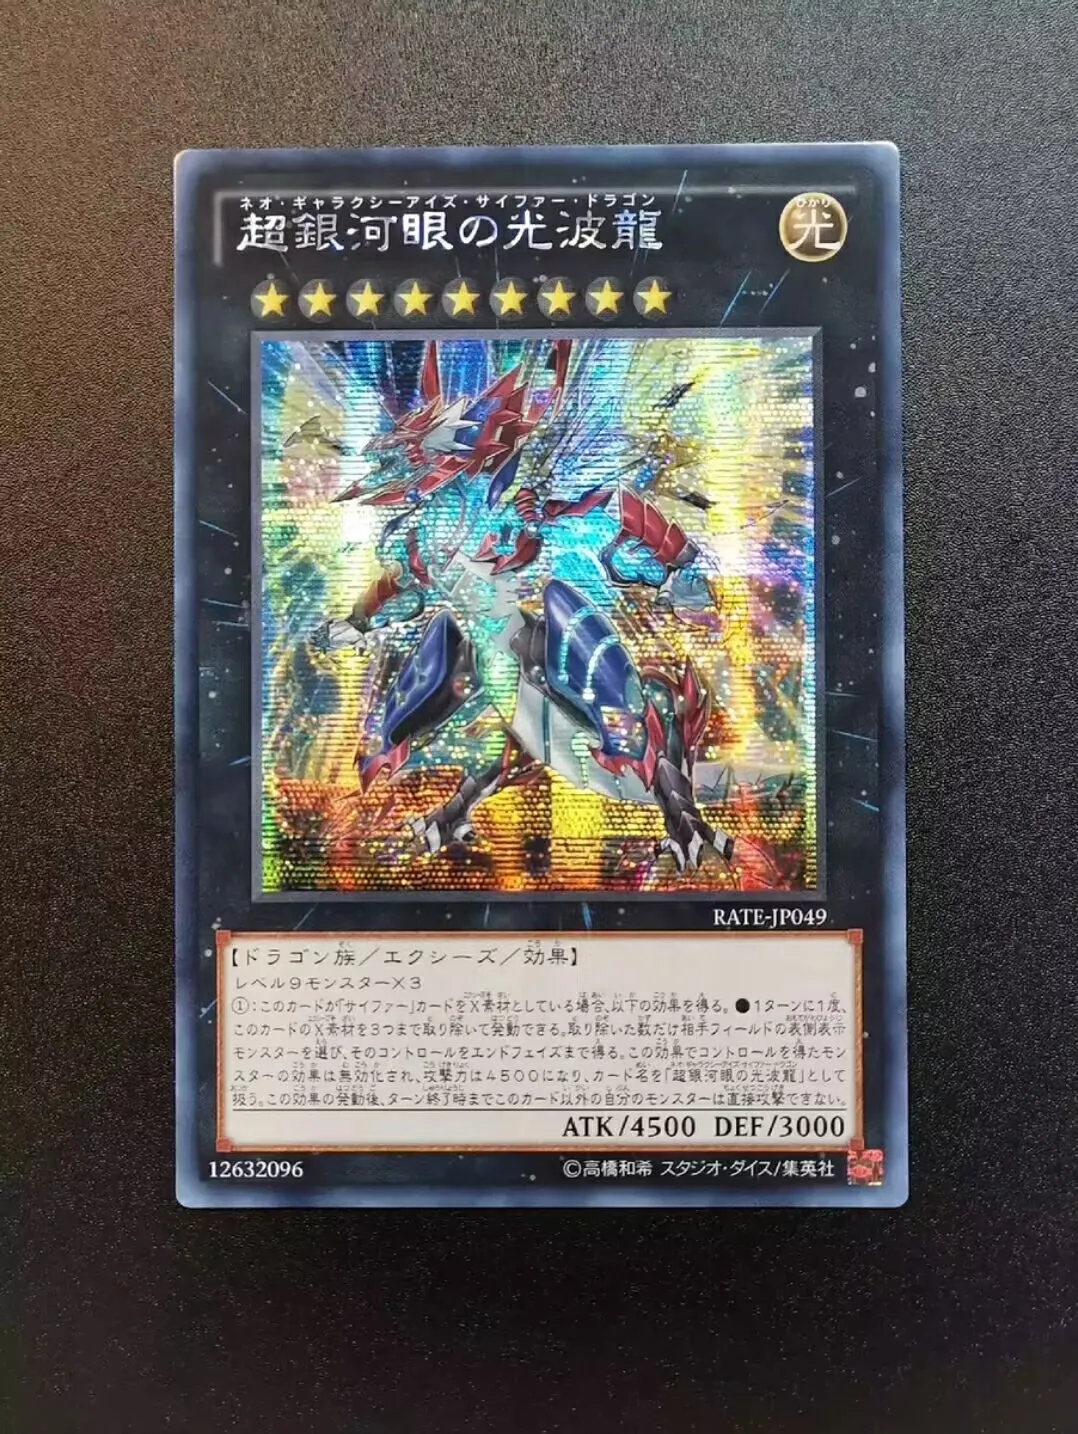 

Master Duel RATE-JP049 - Yugioh - Japanese - Neo Galaxy-Eyes Cipher Dragon - Secret Collection Mint Card